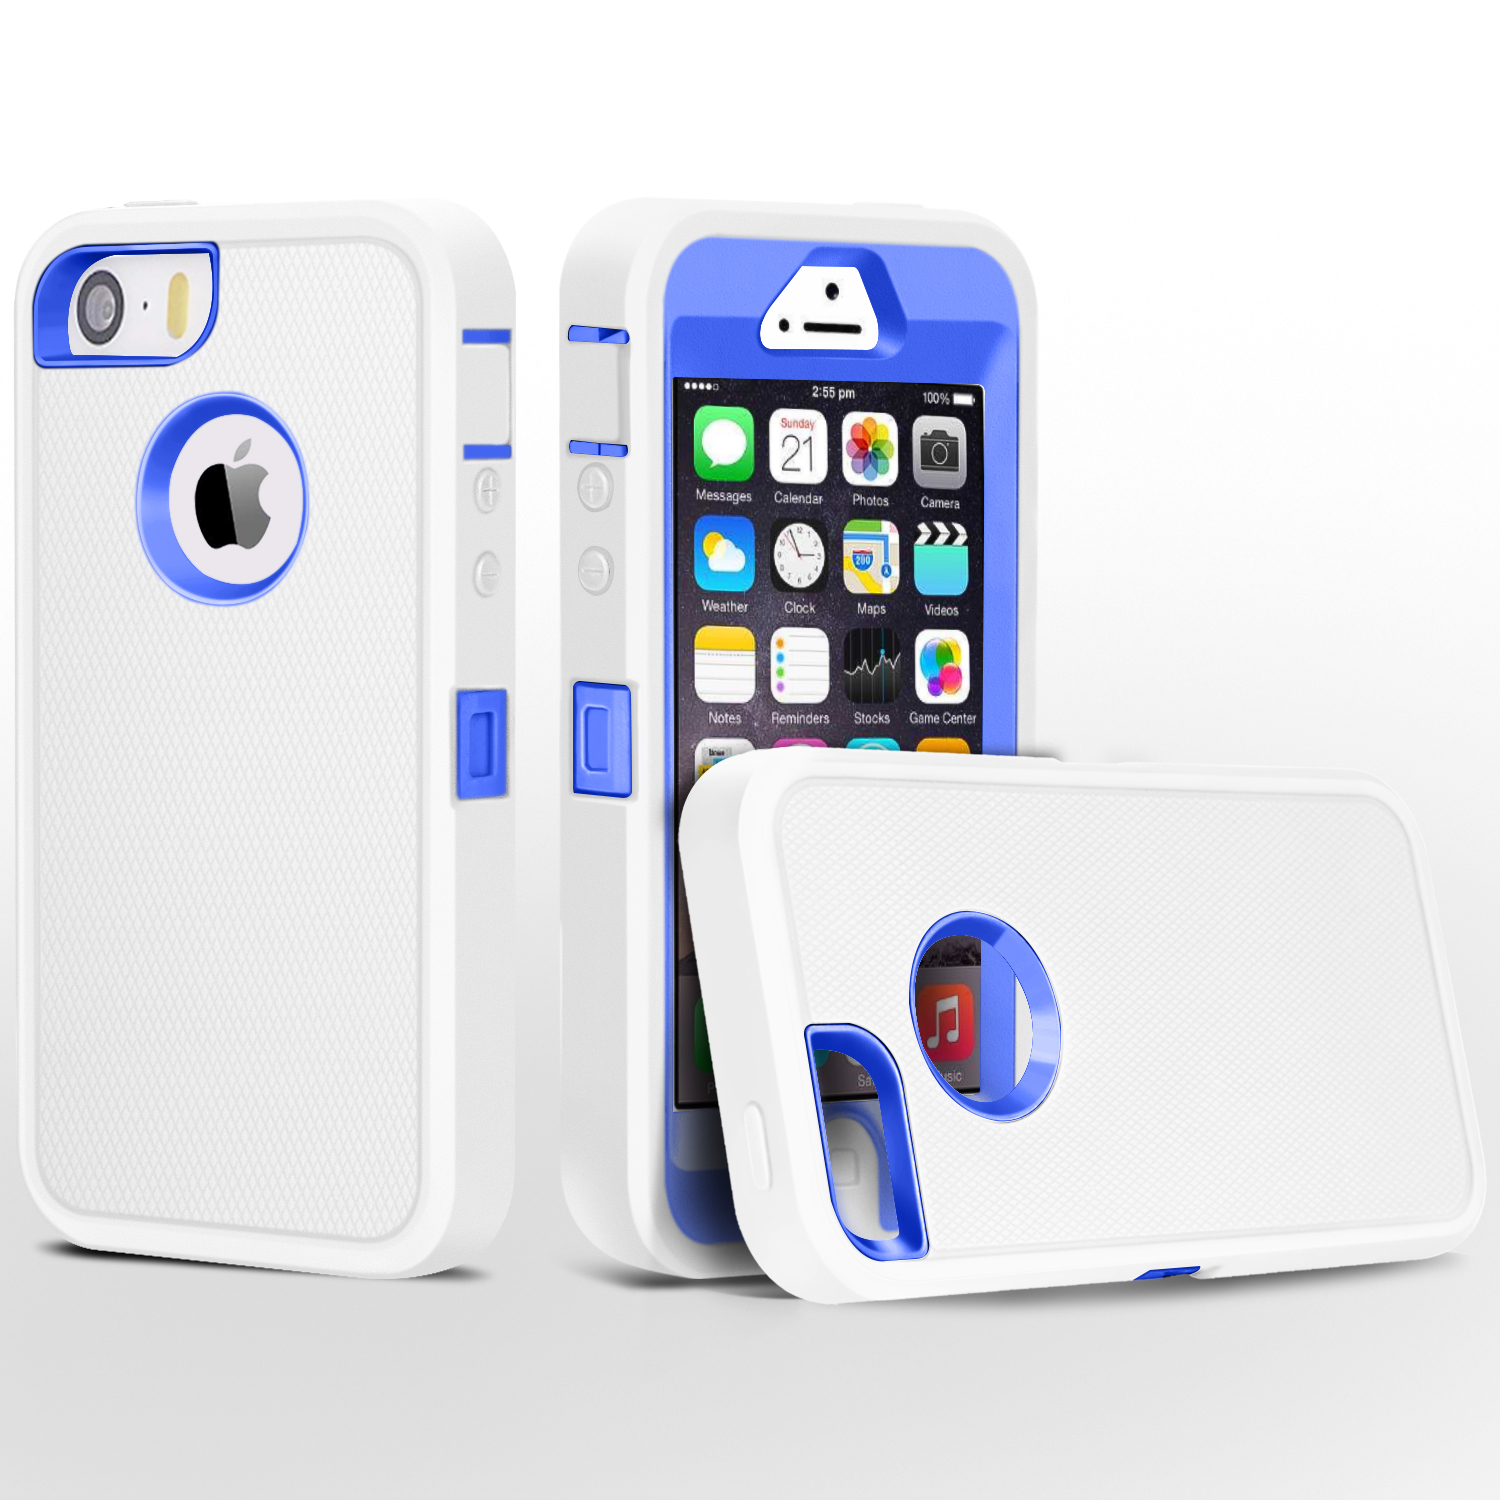 iPhone 5 Case, FogeekHeavy Duty PC + TPU Combo Protective Defender Body Armor Case for iPhone 5 & iPhone 5S(White/Blue) …